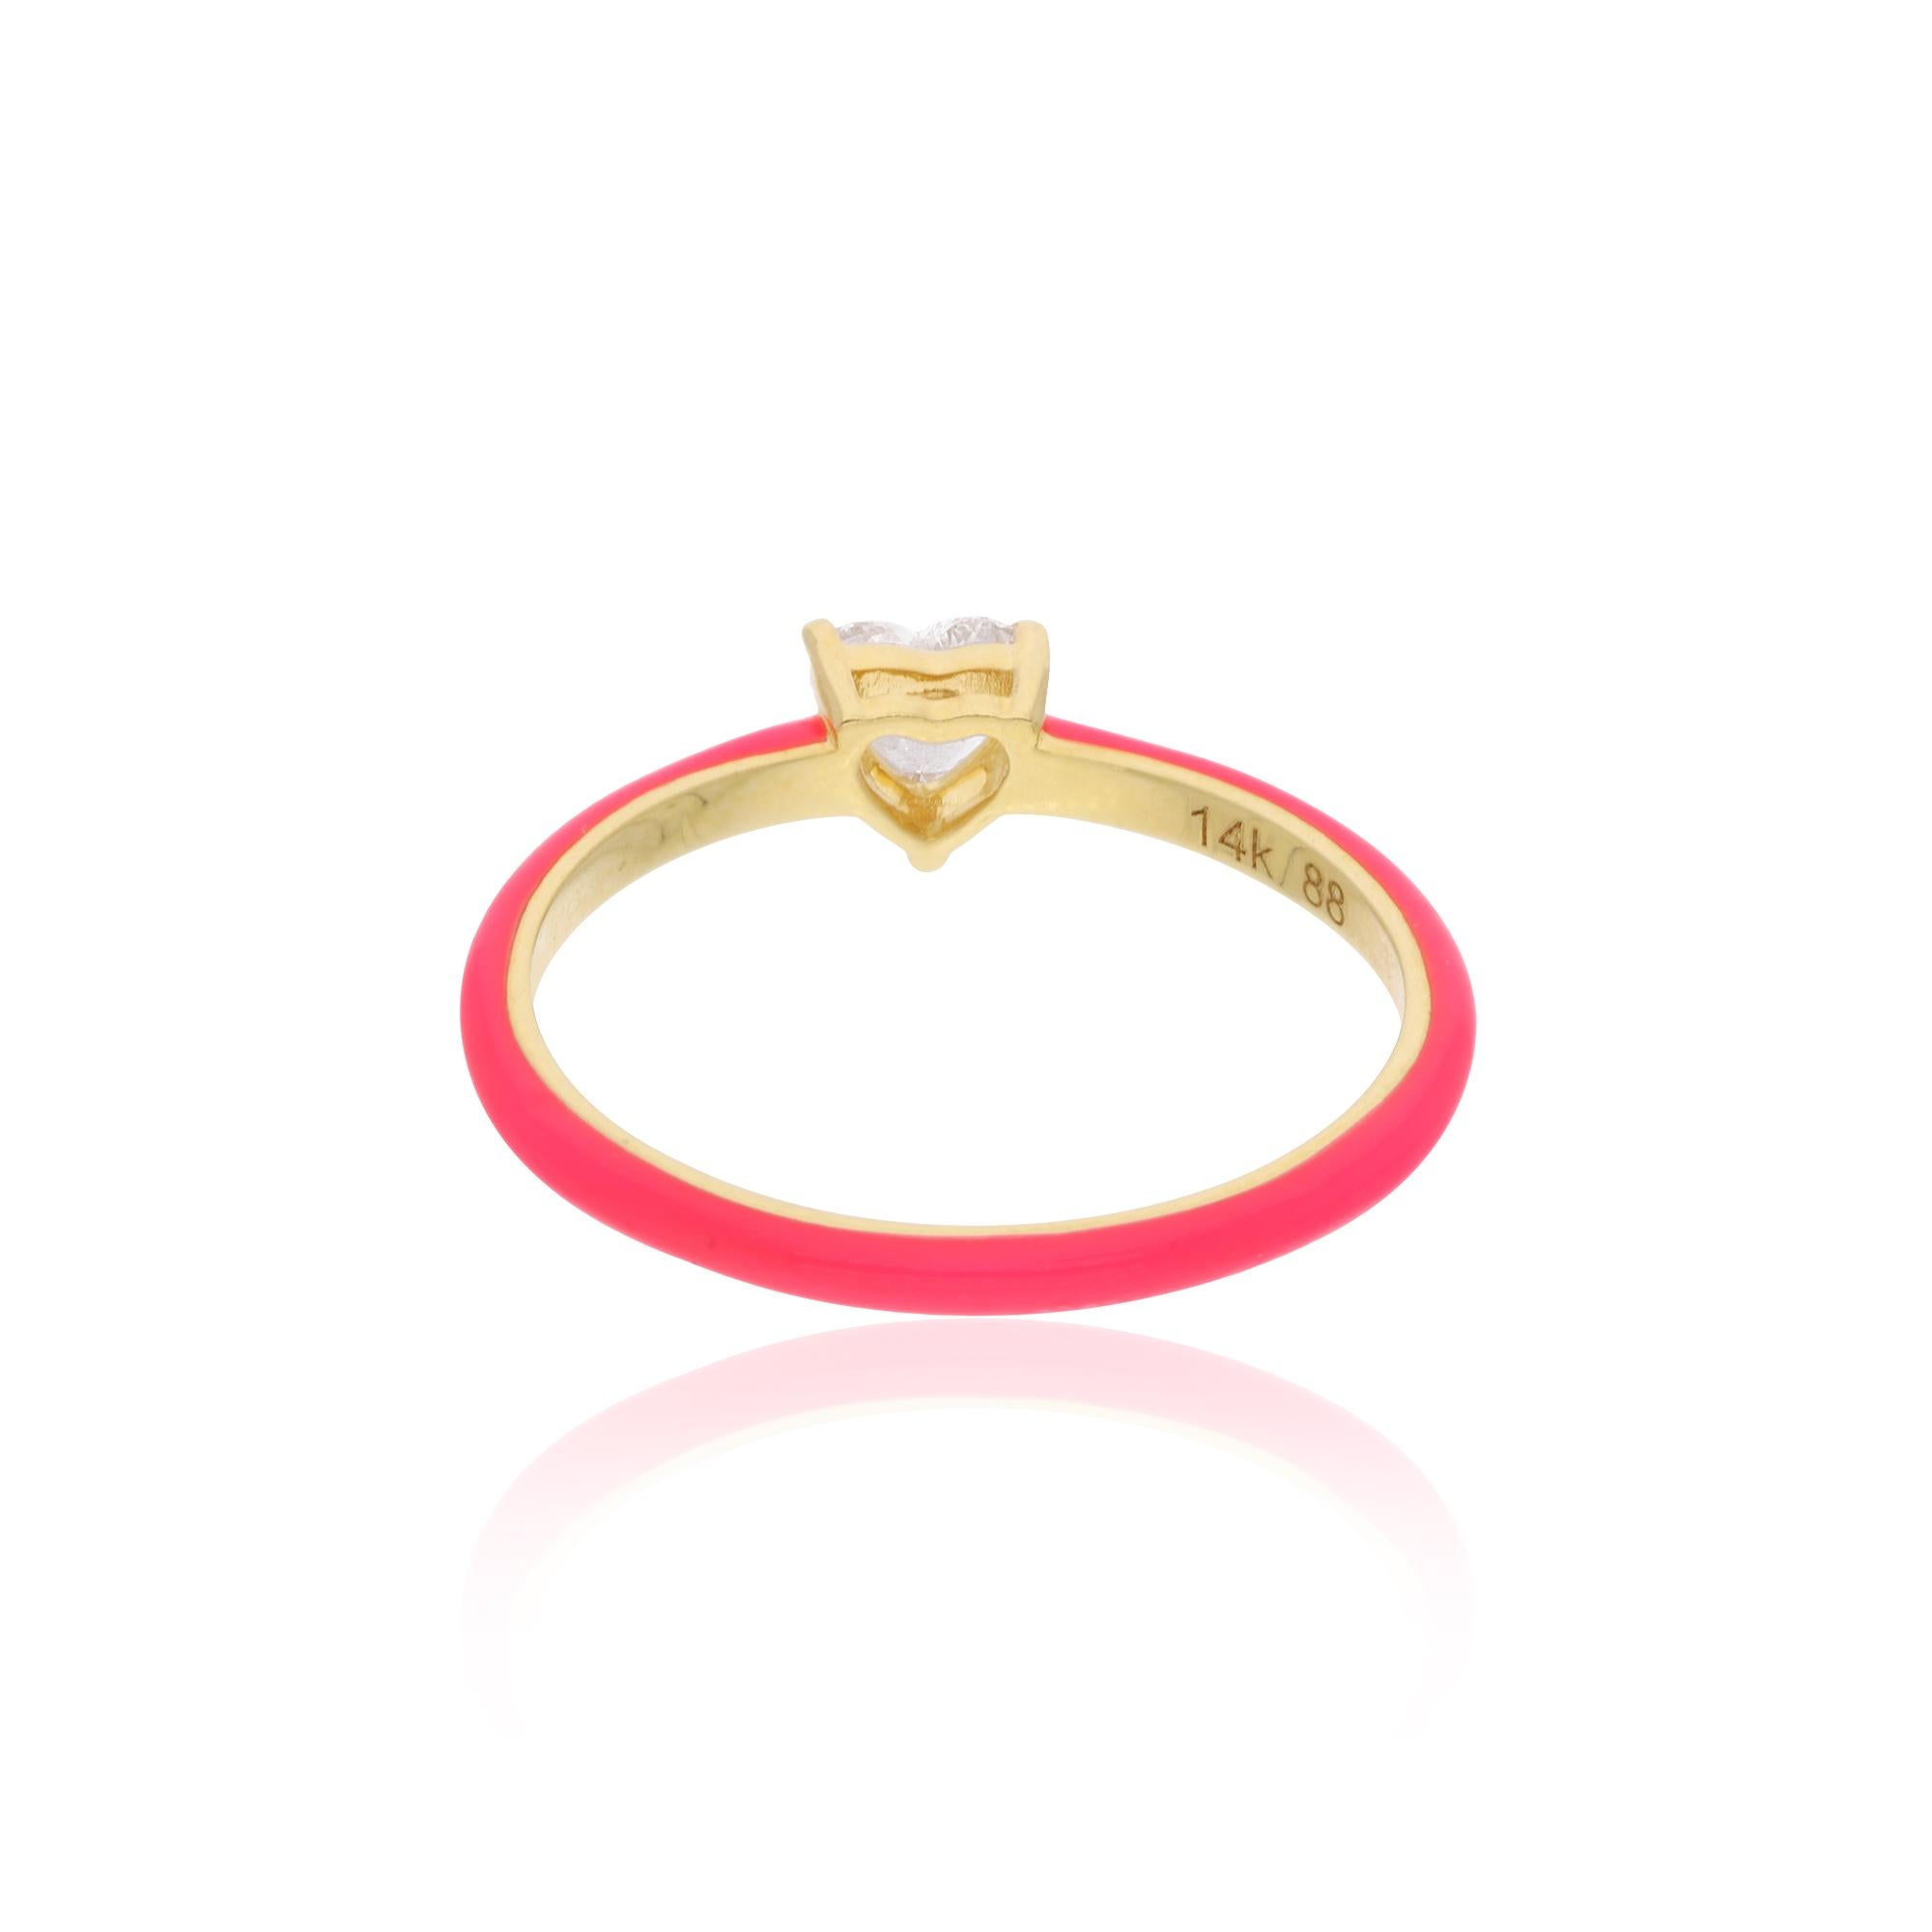 For Sale:  0.3 Carat Solitaire Heart Diamond Red Enamel Band Ring 14 Kt Yellow Gold Jewelry 2